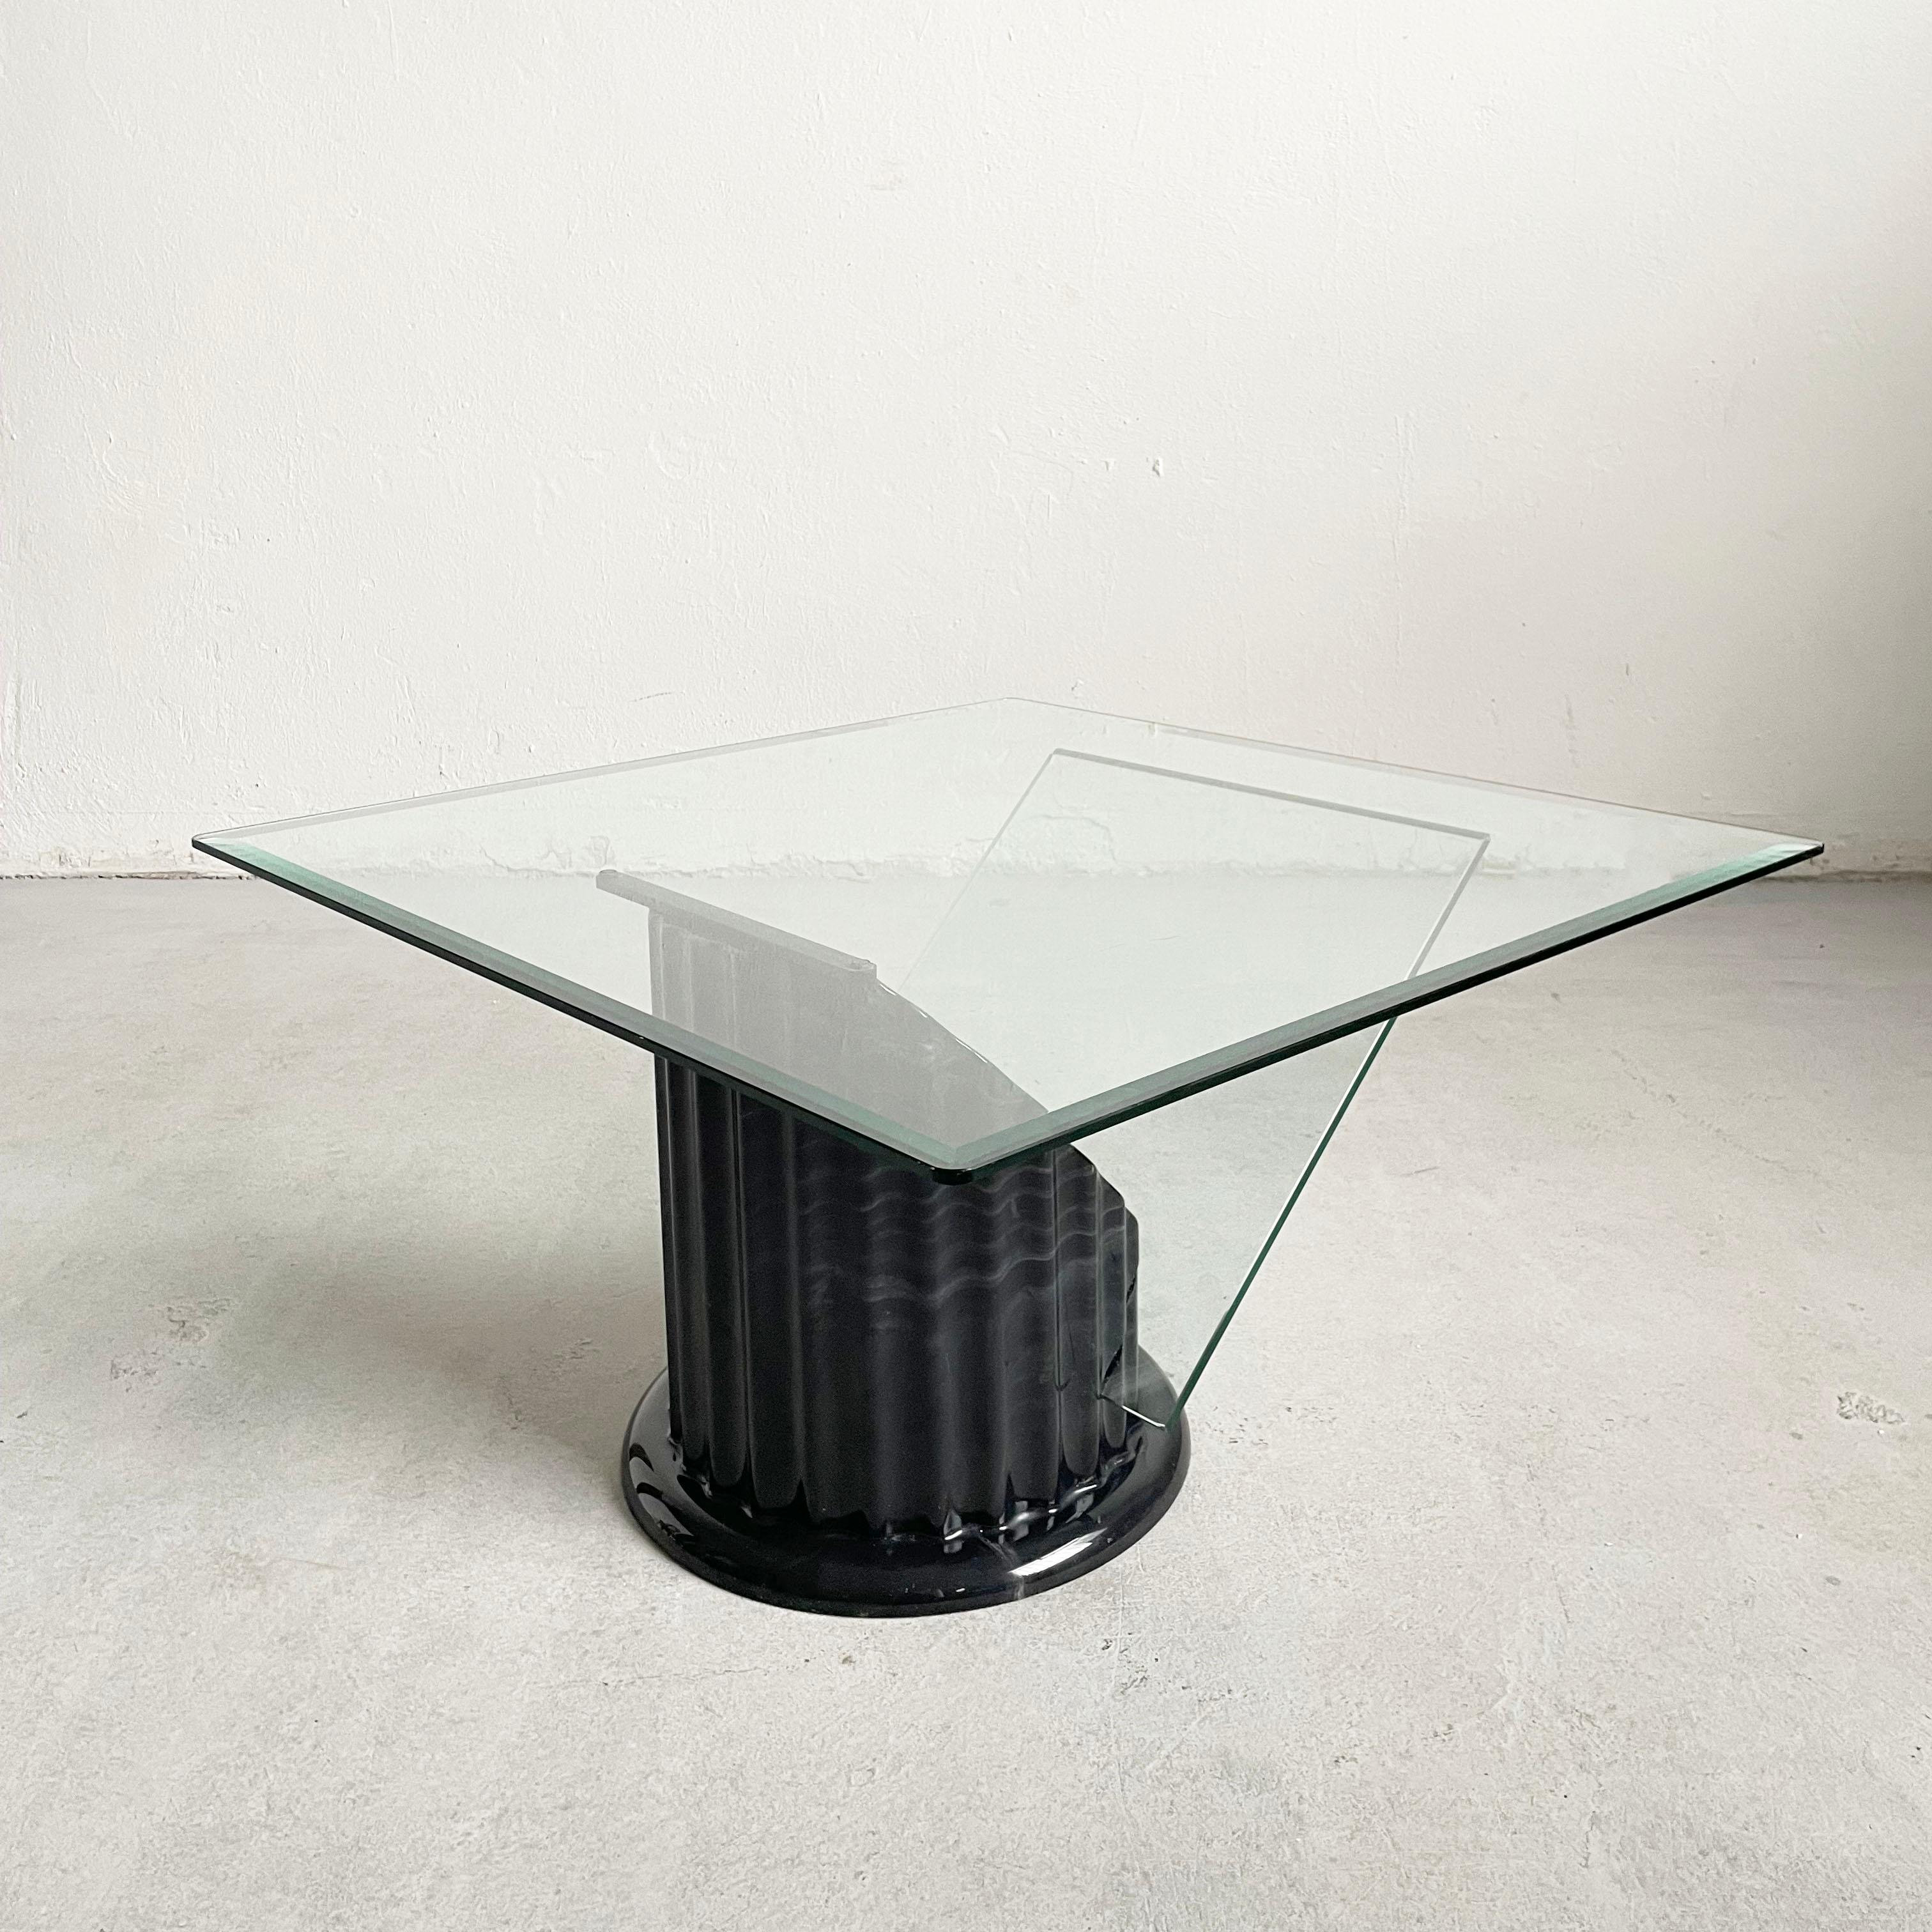 Late 20th Century Postmodern Sculptural Coffee Table, Black Faux Marble and Glass, 1980s For Sale